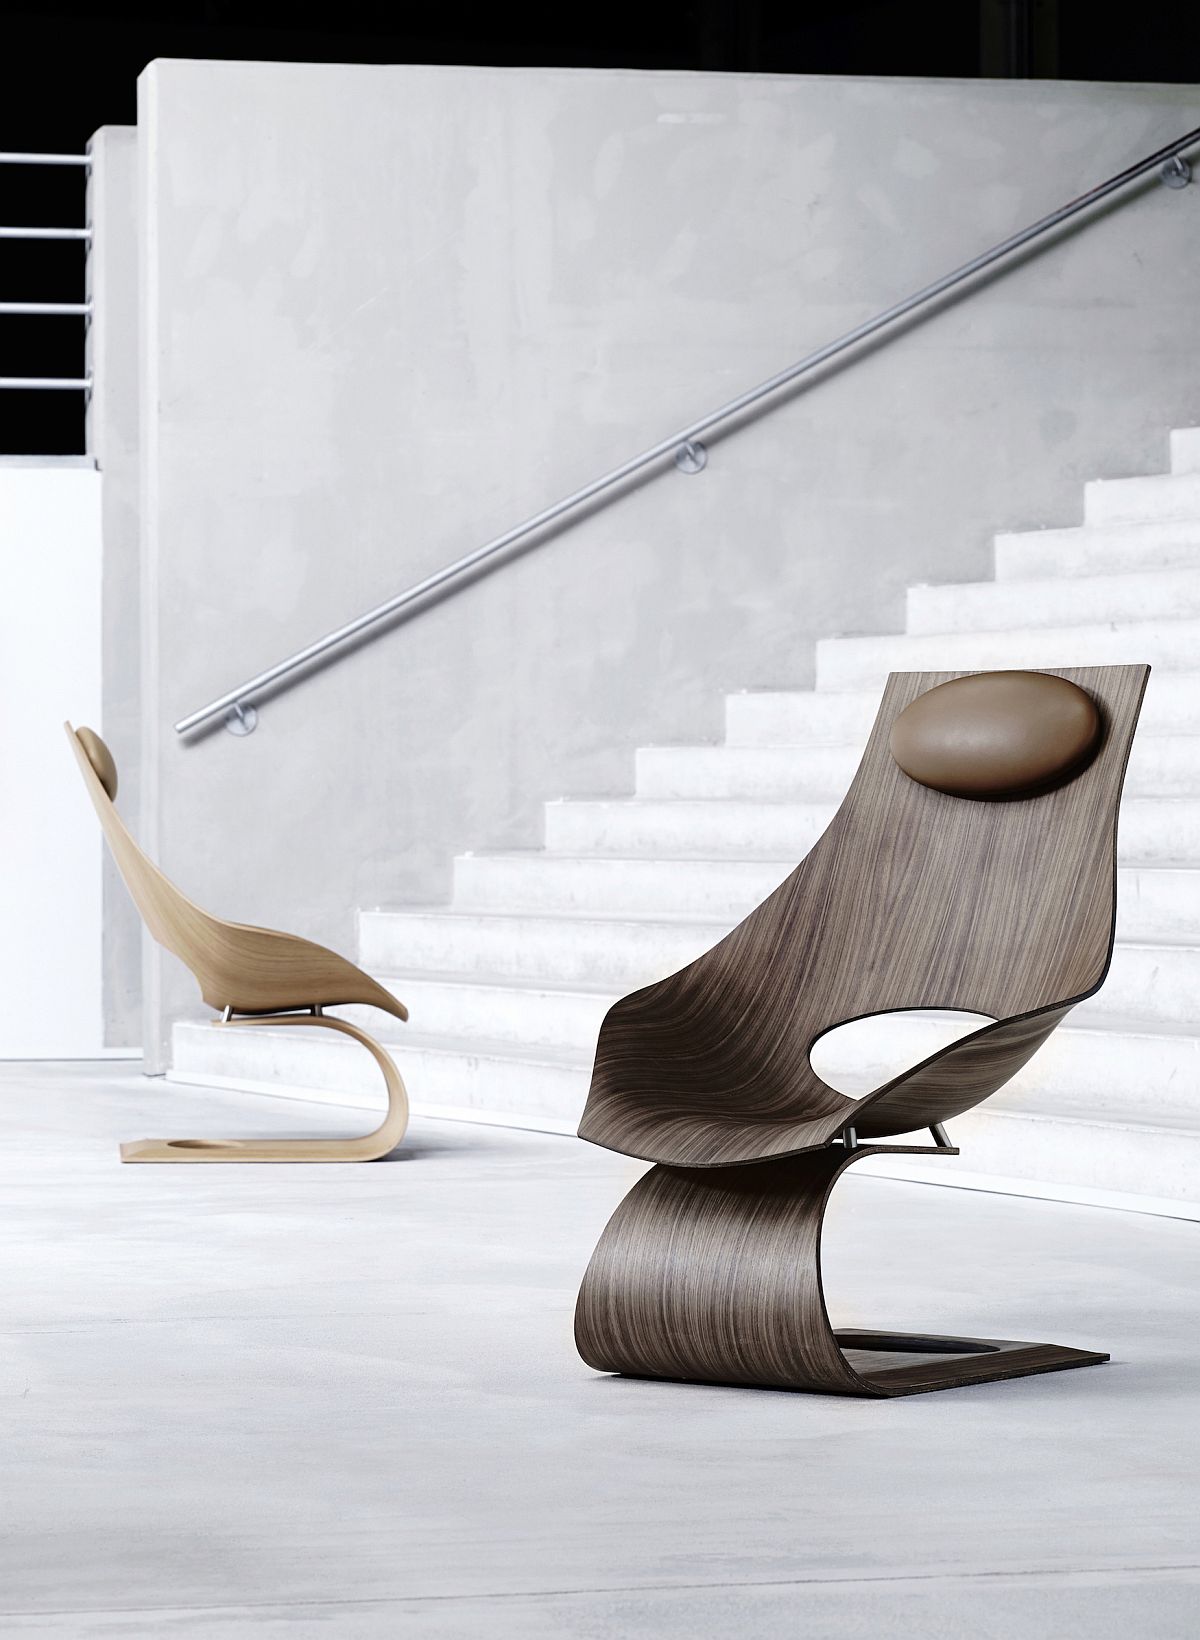 Three‐dimensional-plywood-is-used-to-create-the-beautiful-Dream-Chair-71138